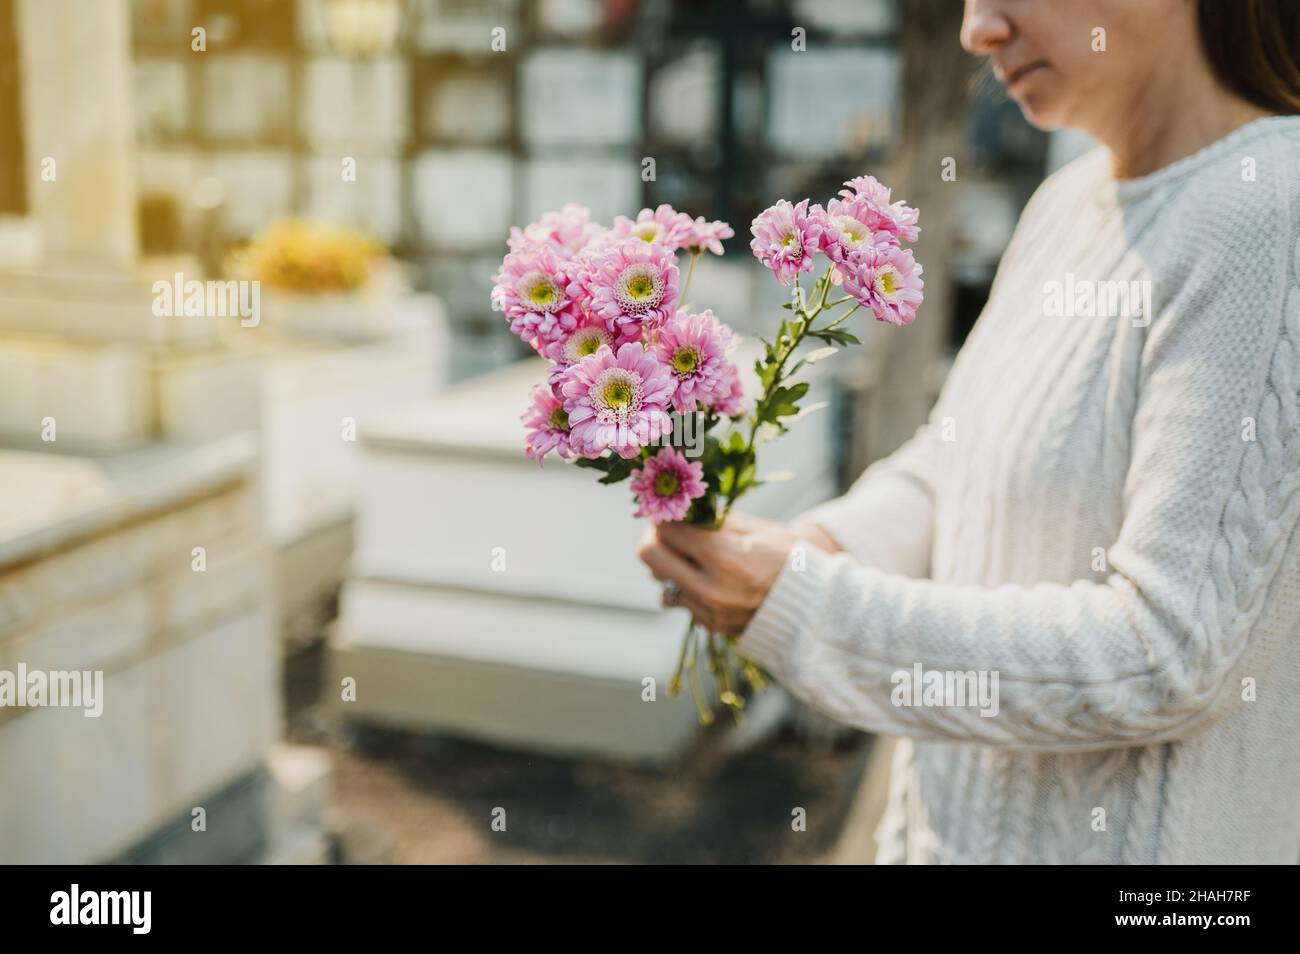 Crop woman with flowers in hands standing near gravestone in cemetery Stock Photo